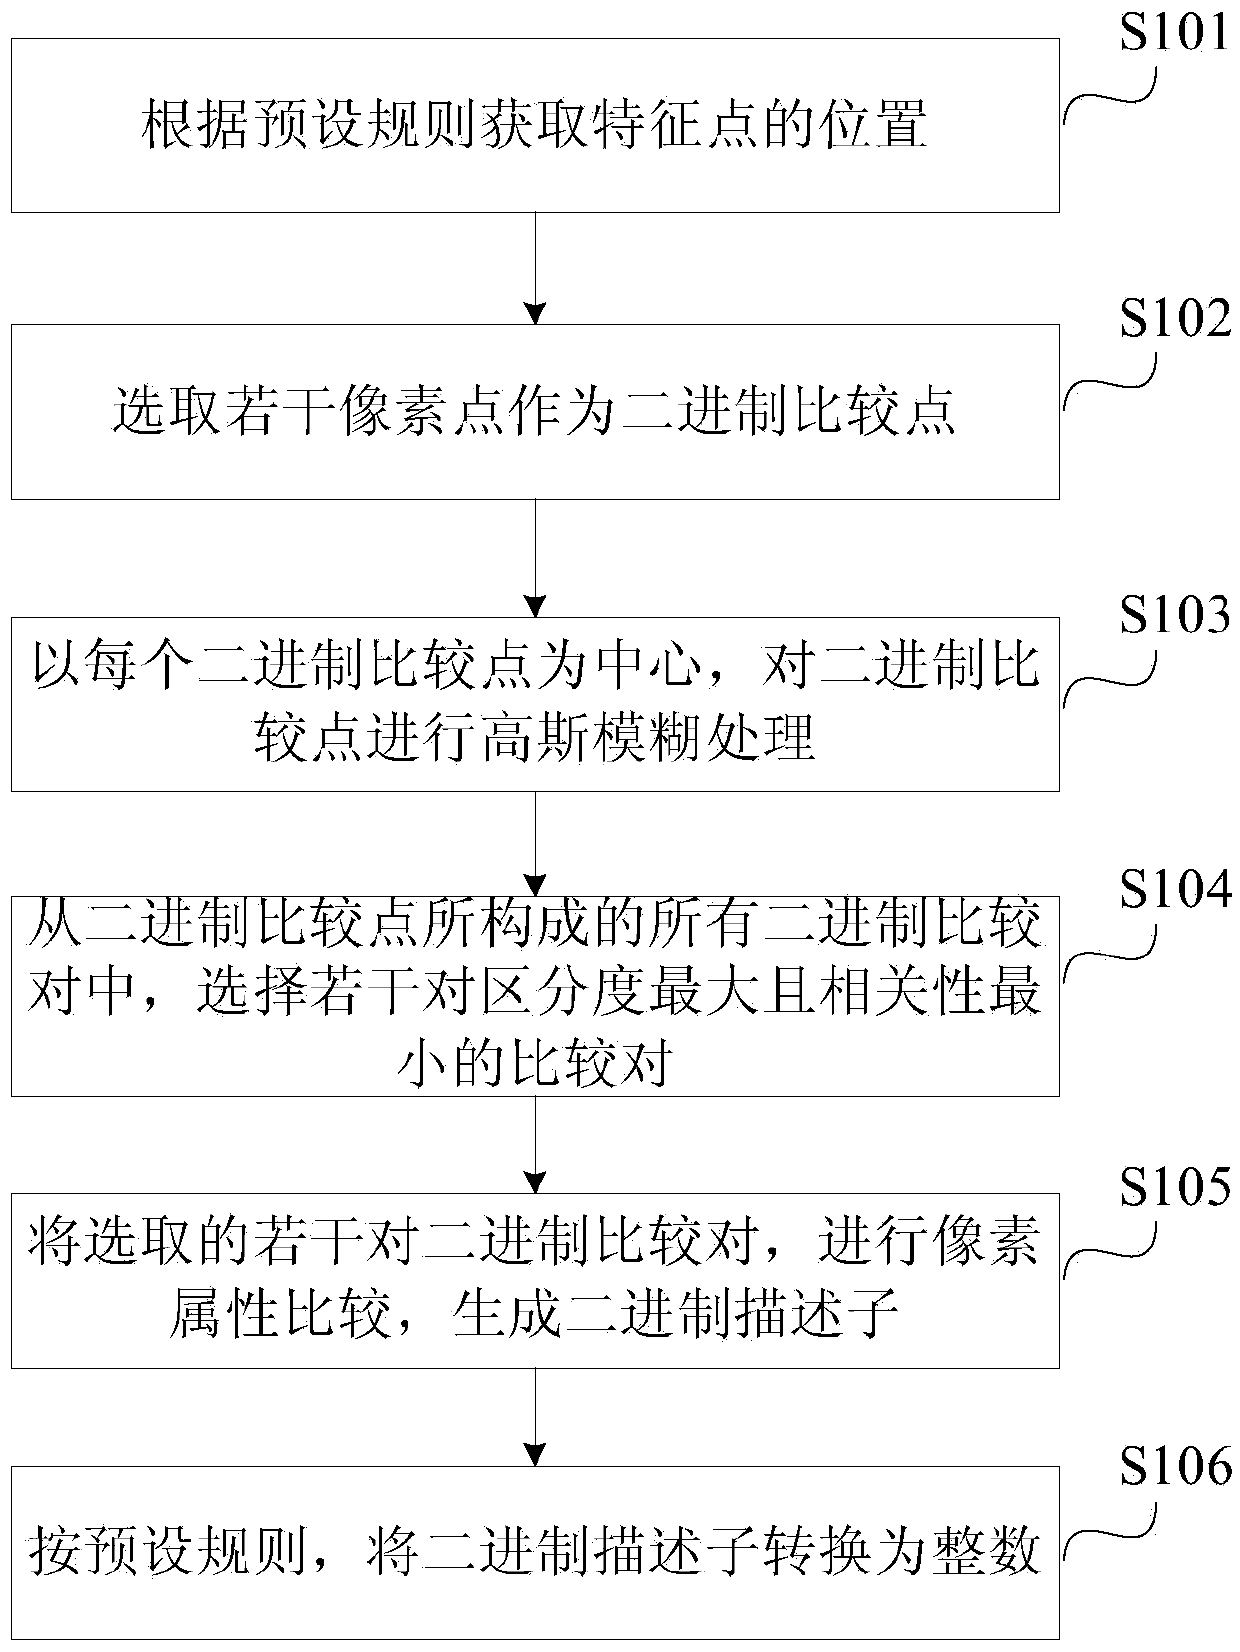 A binary image feature extraction method and system